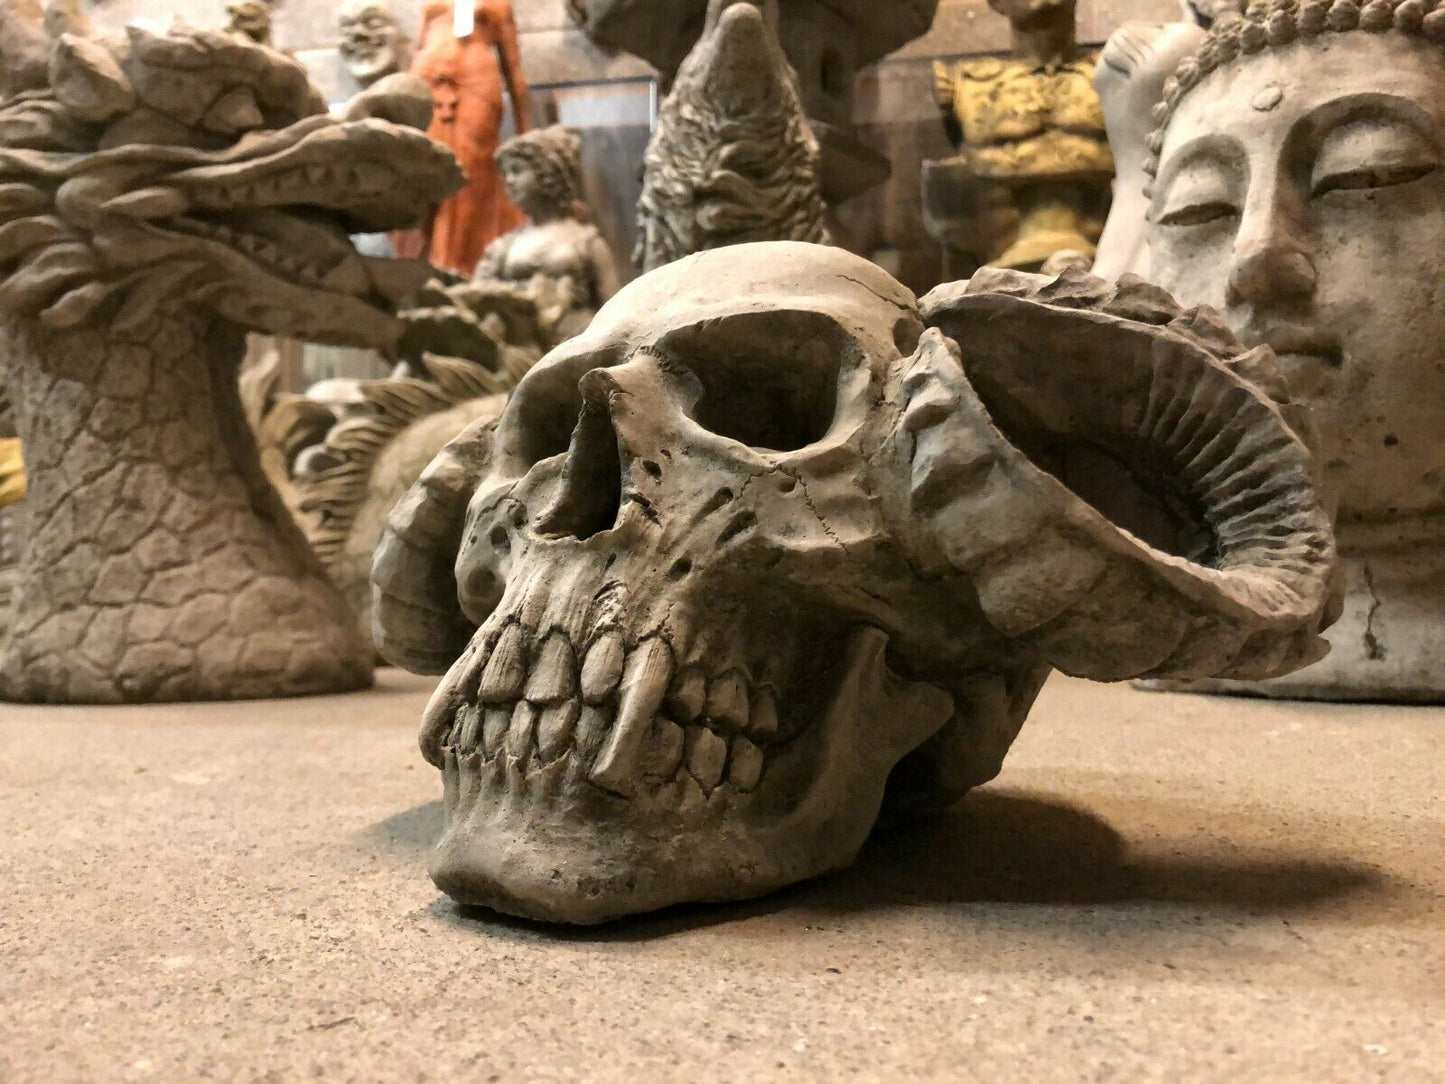 Stone Skull with Horns Ornaments